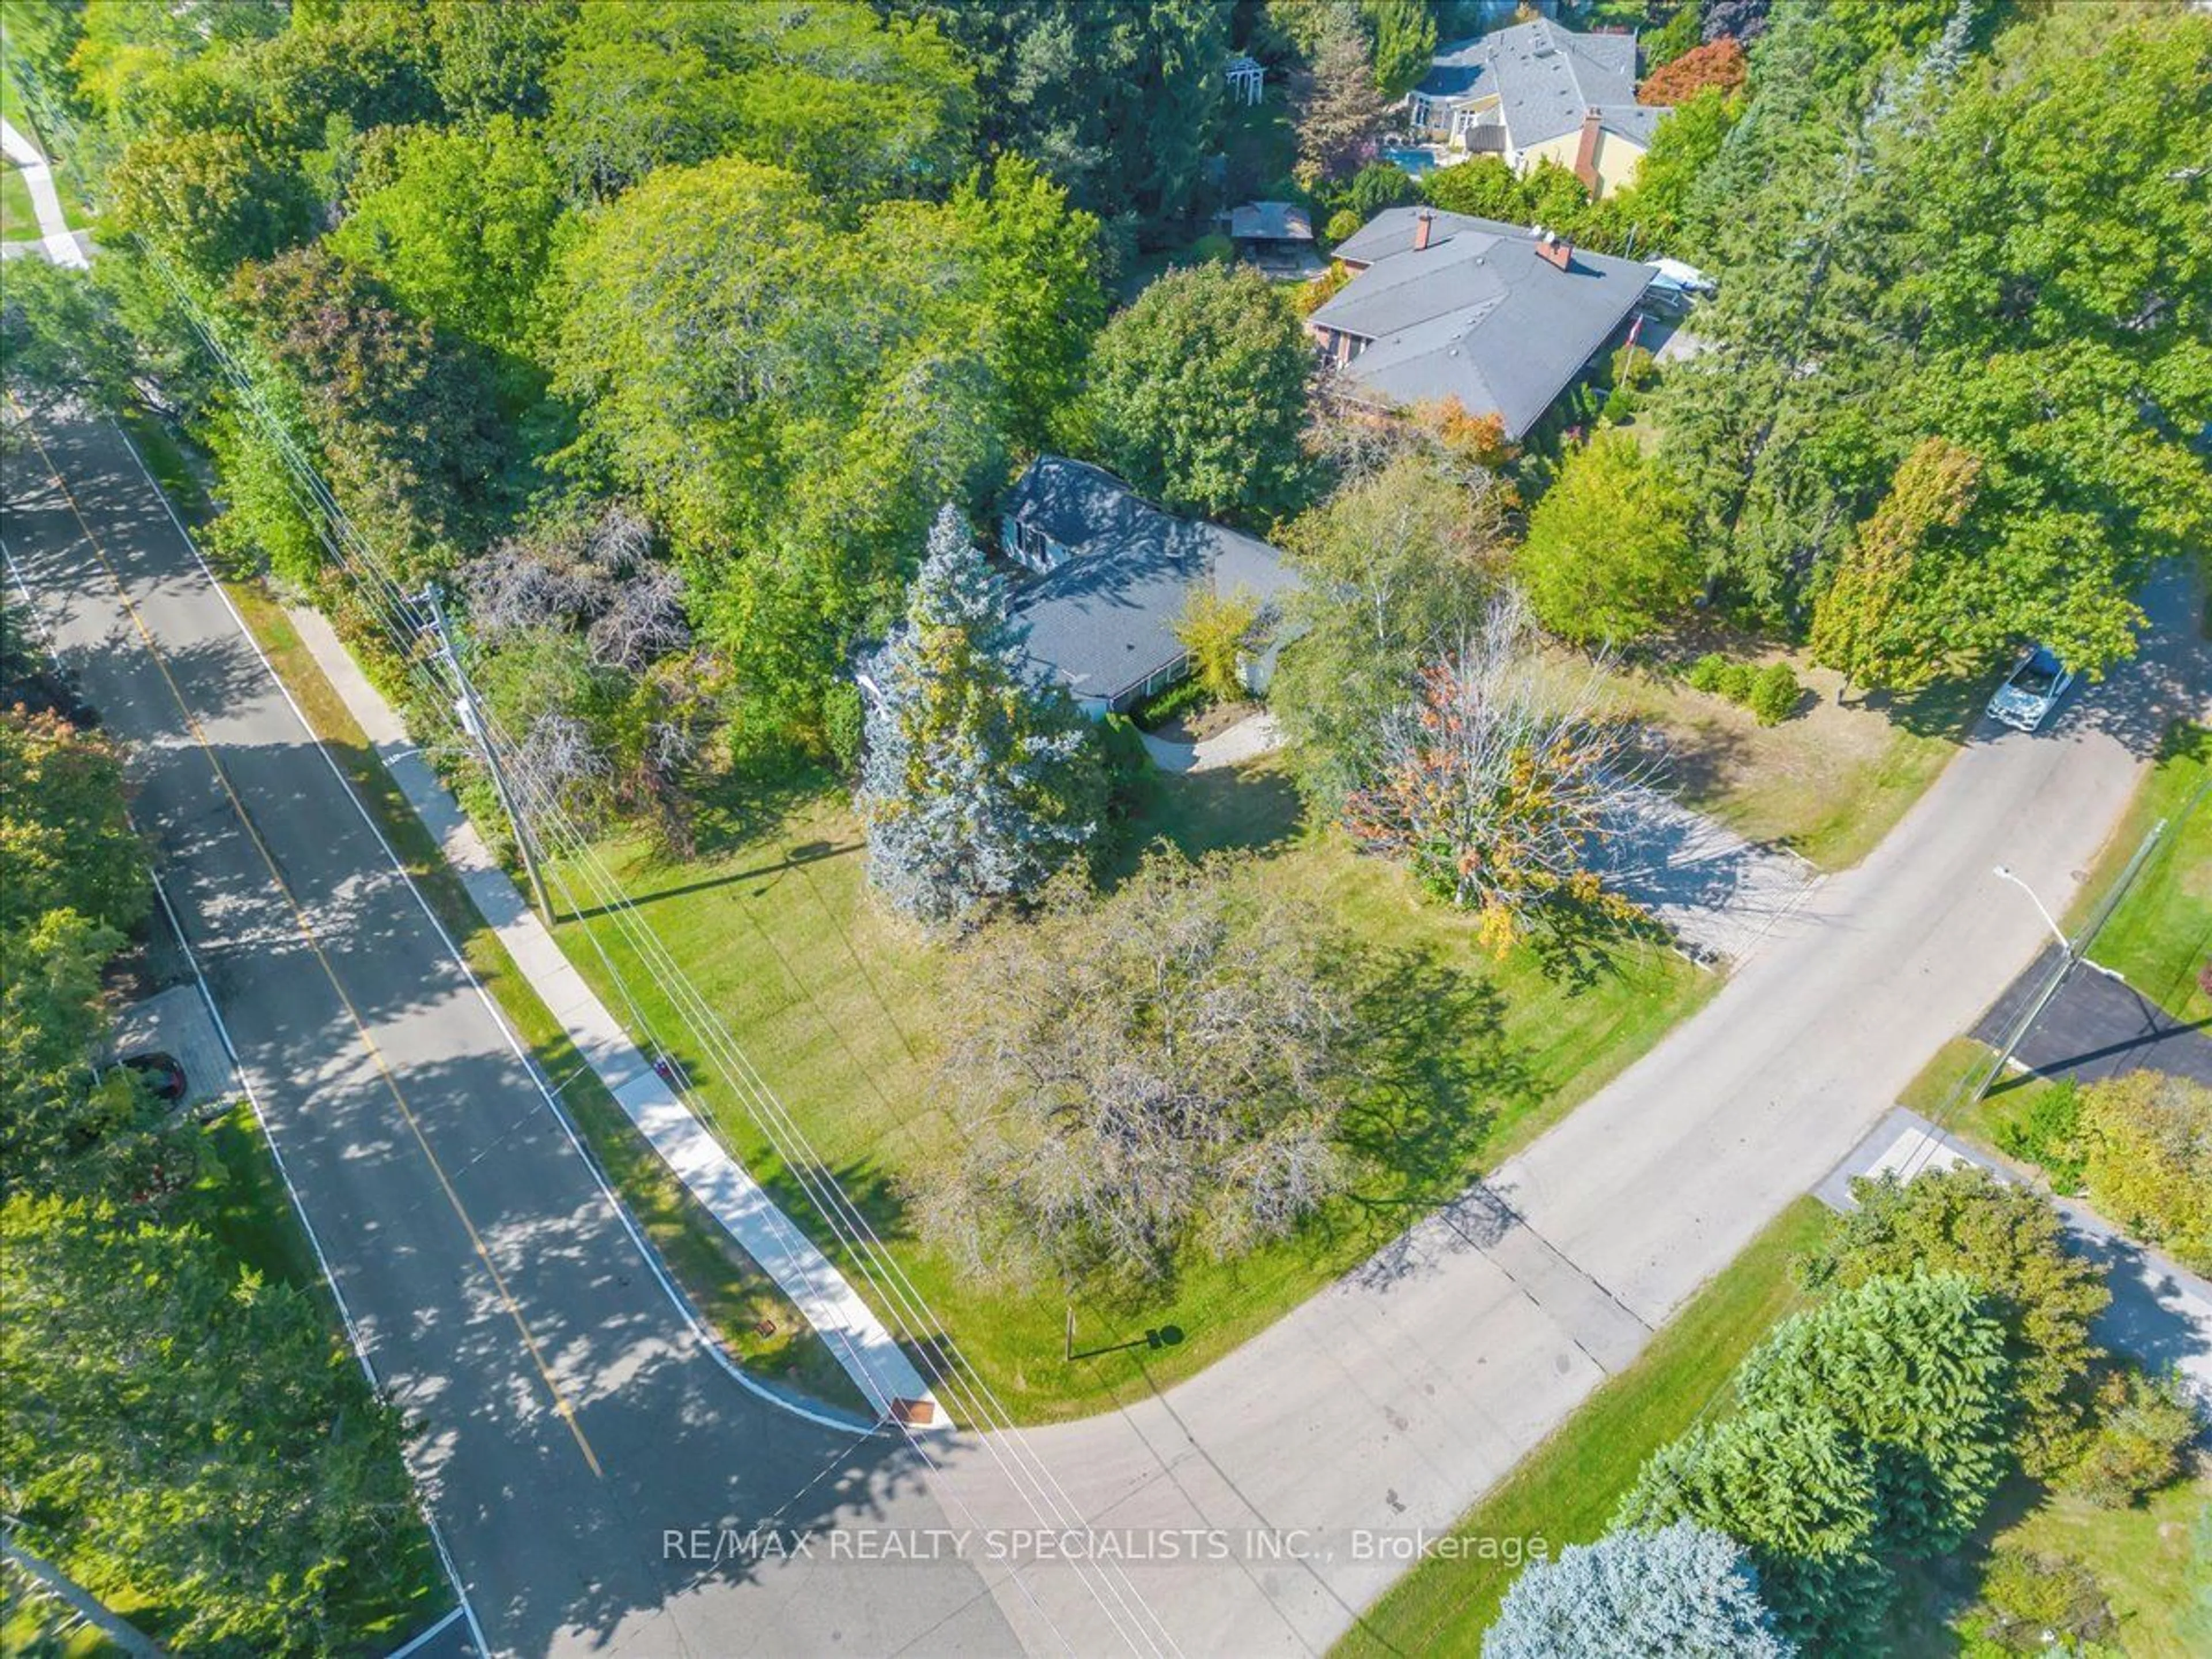 Street view for 500 Old Poplar Row, Mississauga Ontario L5J 2N8